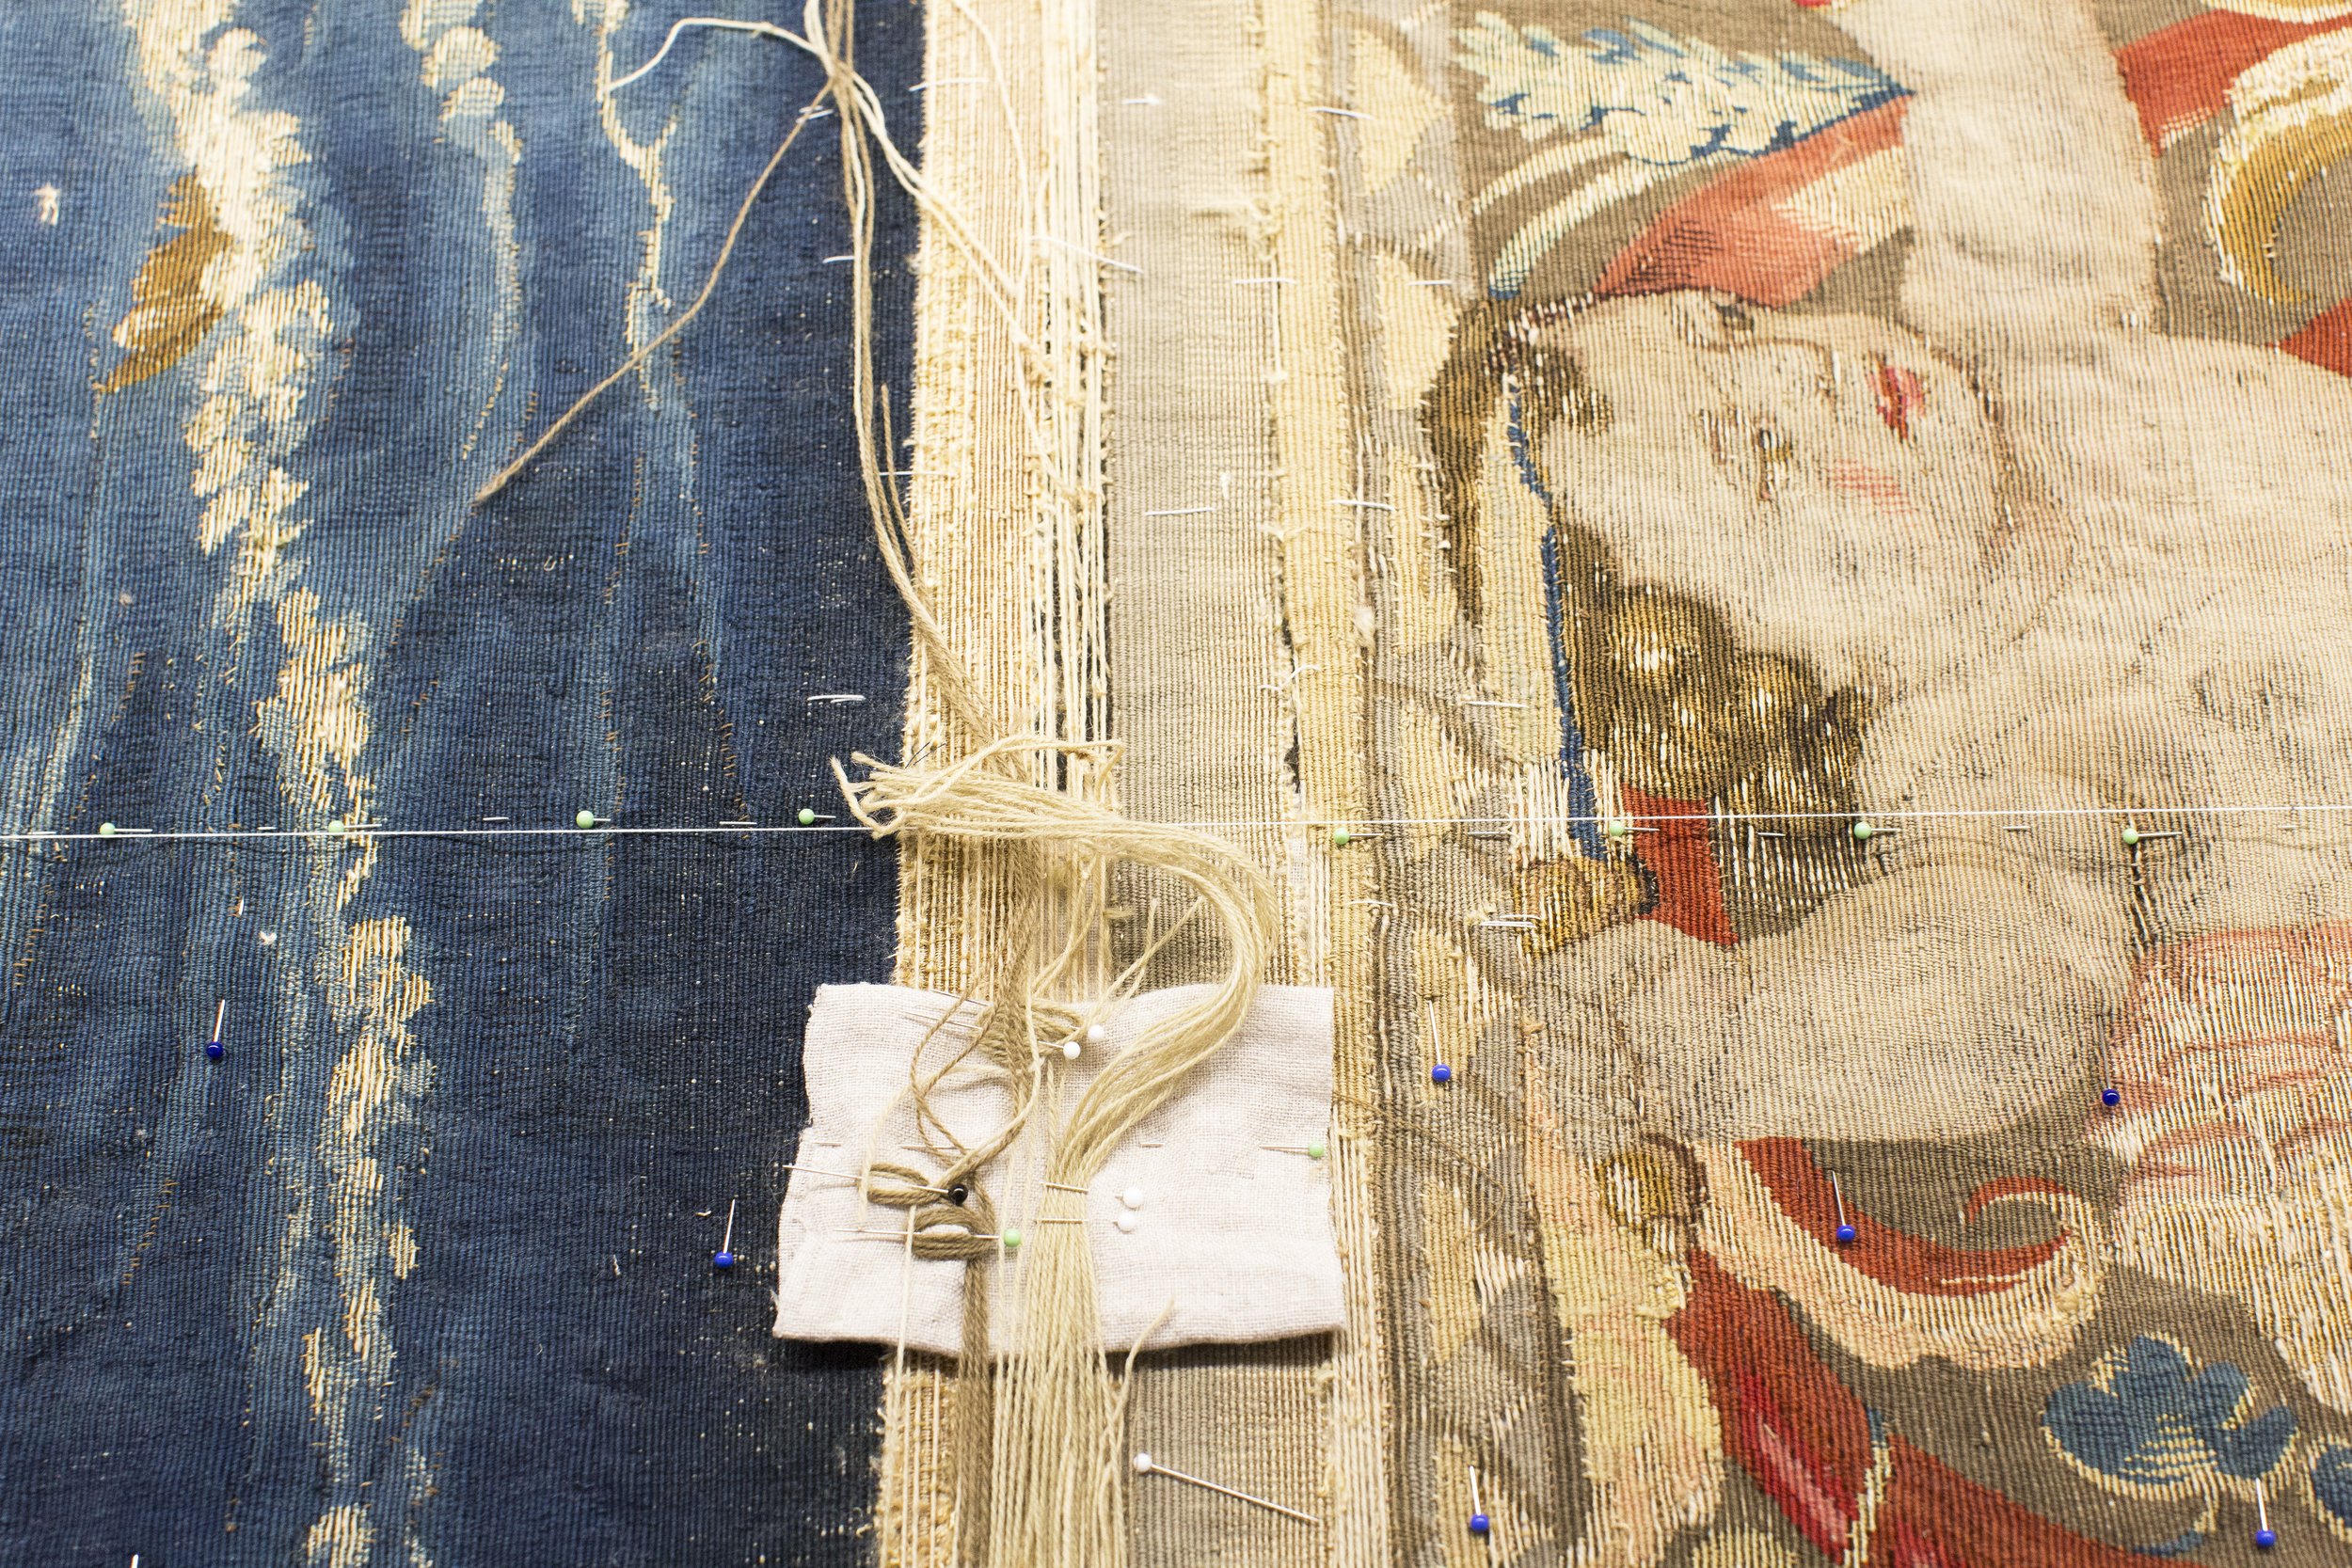   A detail inside the tapestry restoration room at Hampton Court Palace.   